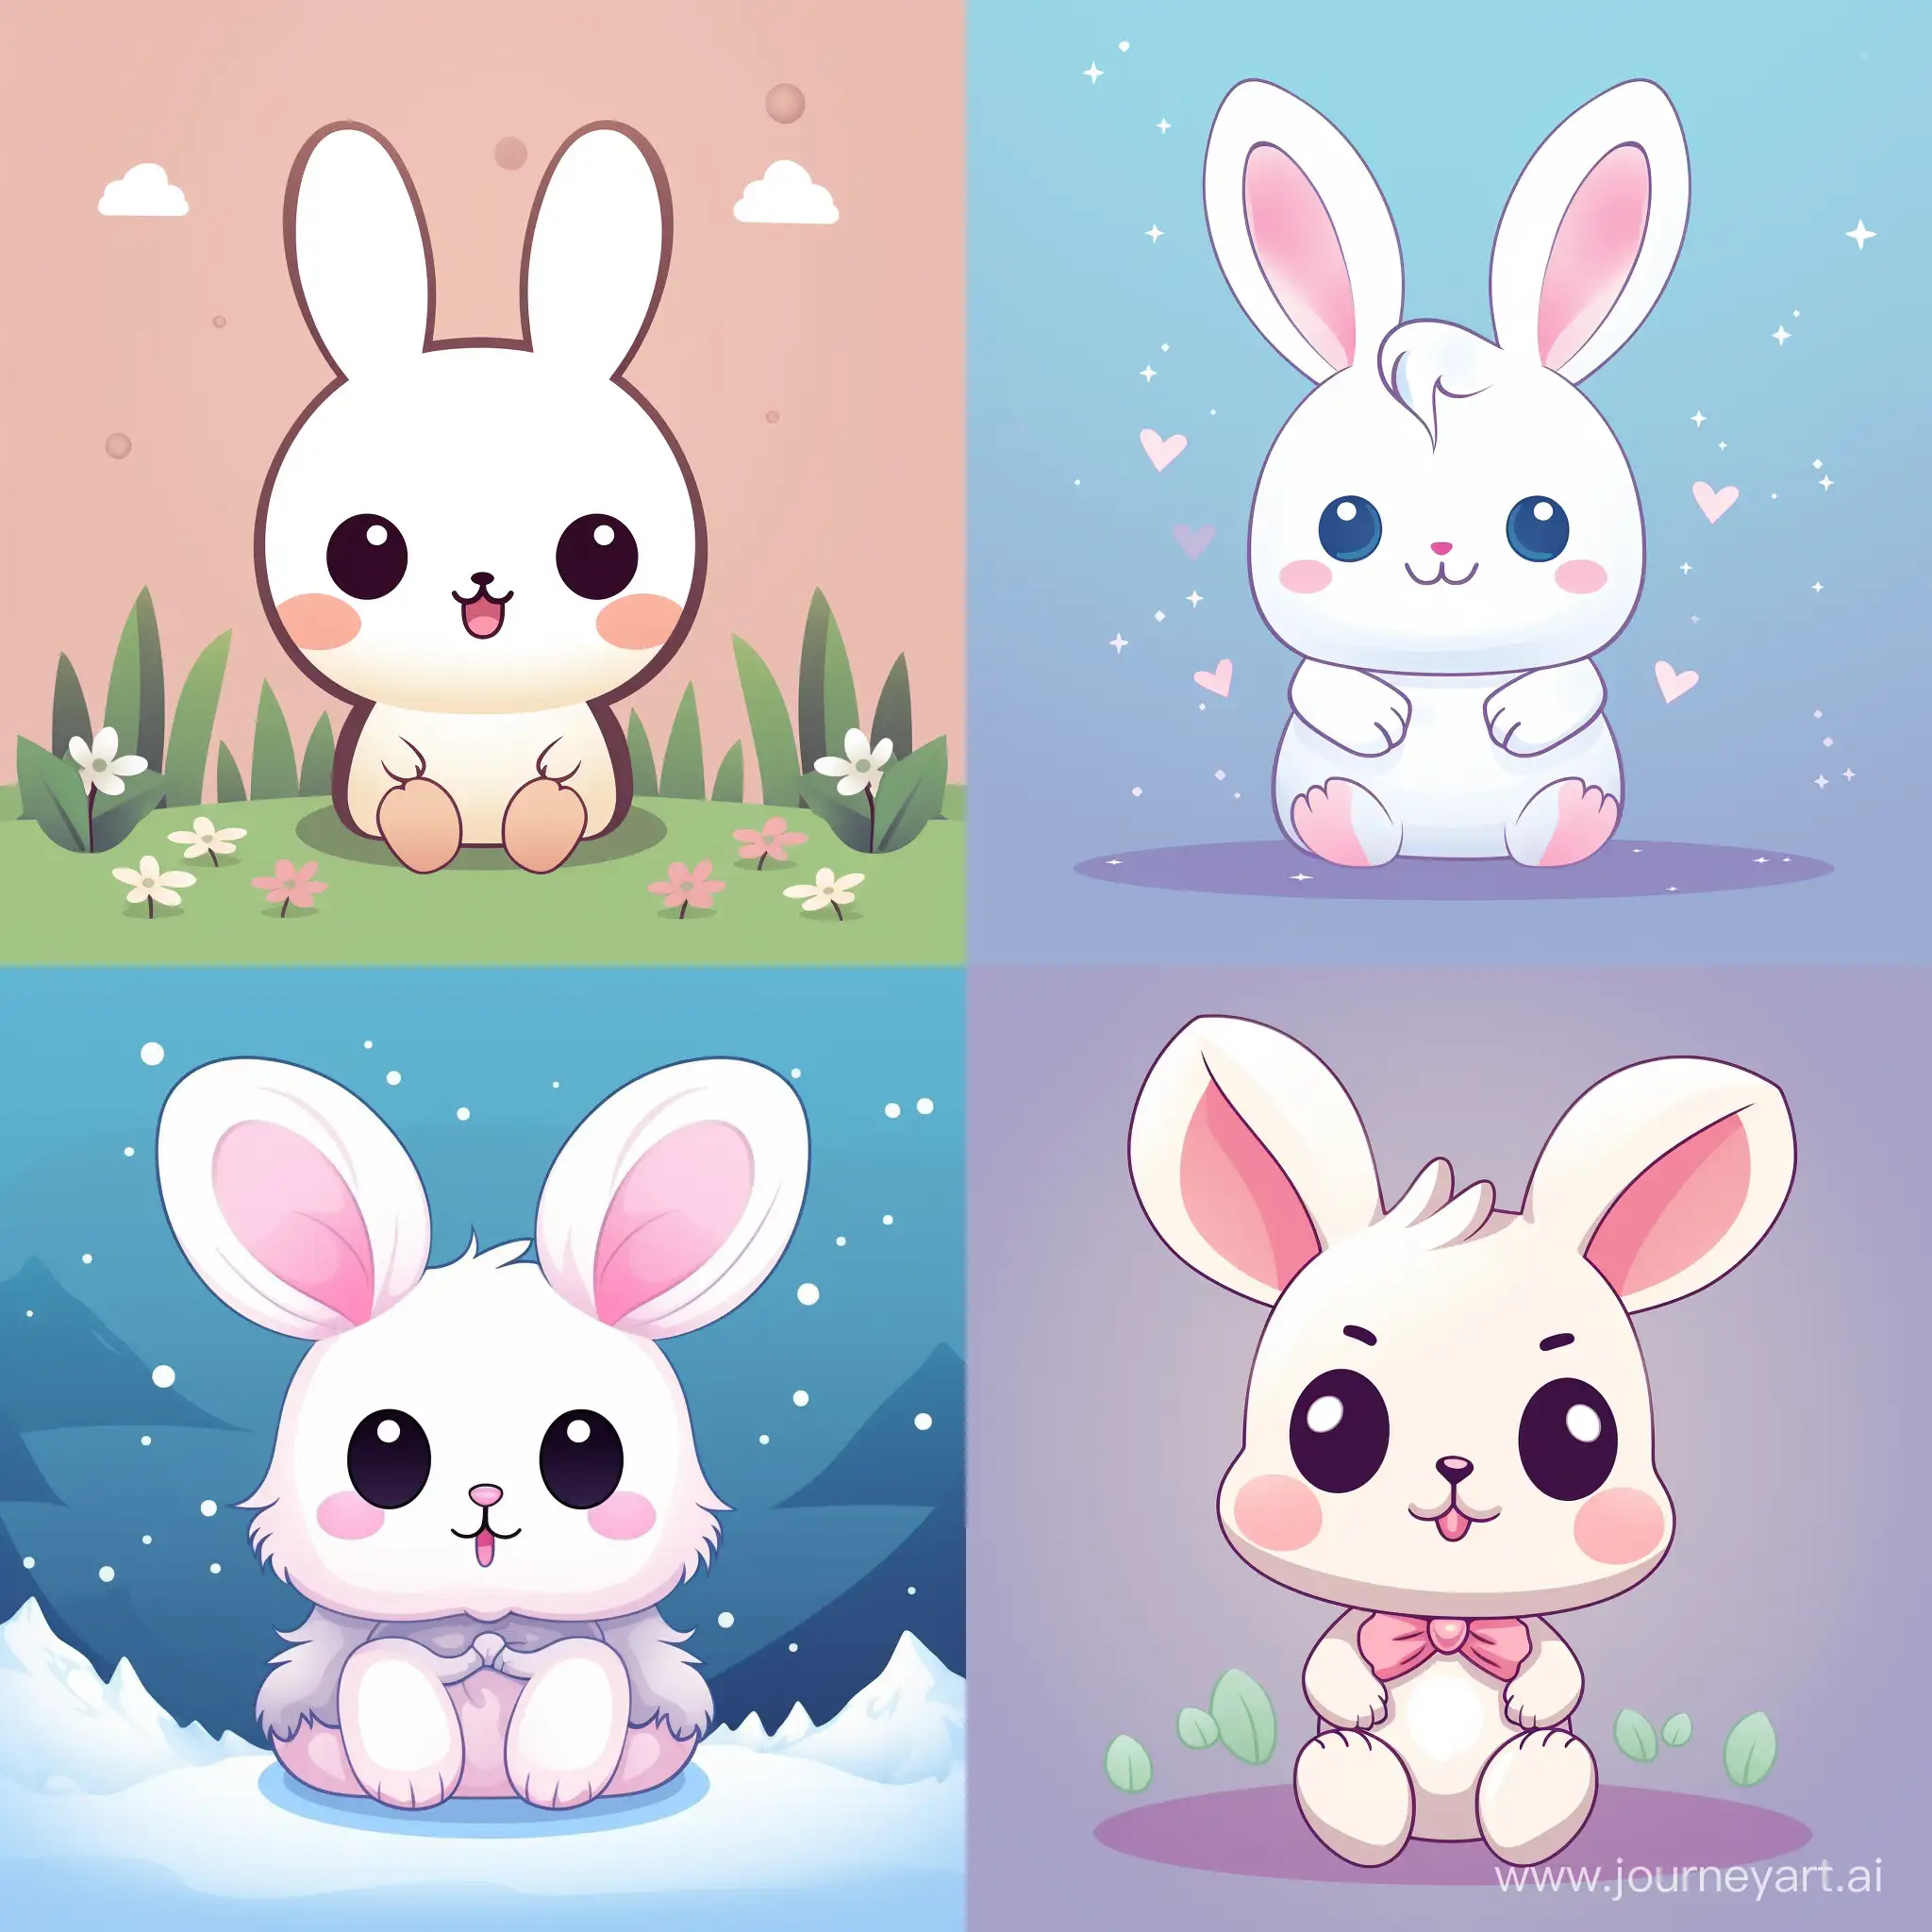 Charming-2D-Kawaii-Bunny-Surrounded-by-Adorable-Pastel-Designs